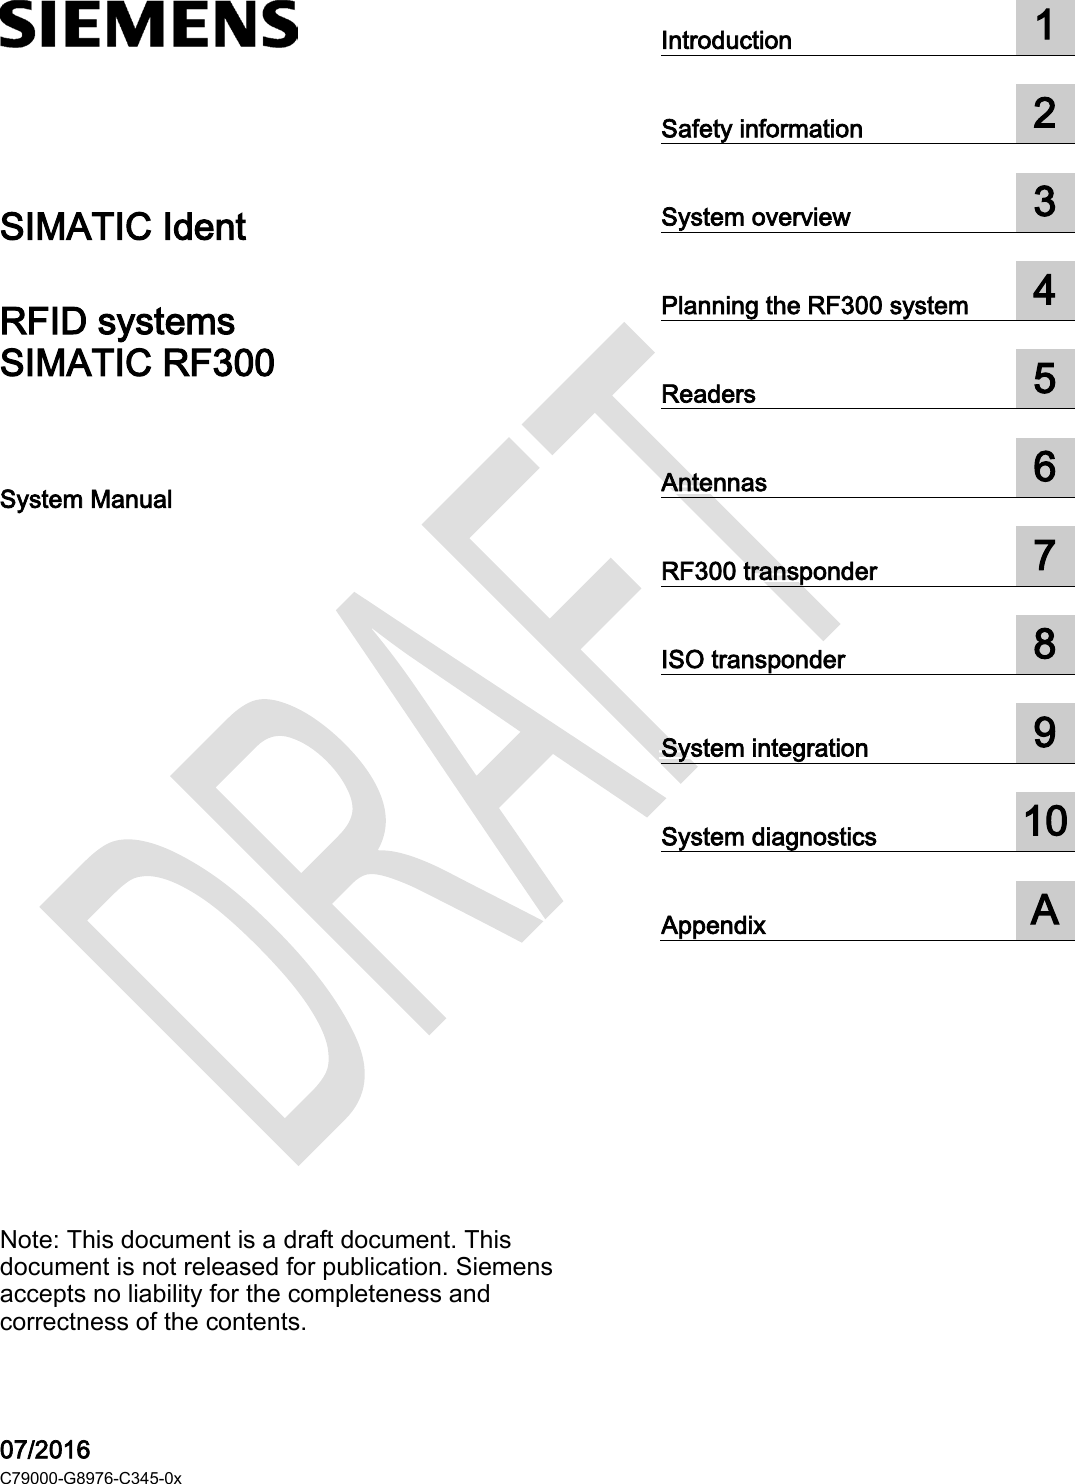   SIMATIC RF300  ___________________ ___________________ ___________________ ___________________ ___________________ ___________________ ___________________ ___________________ ___________________ ___________________ ___________________  SIMATIC Ident RFID systems SIMATIC RF300 System Manual Note: This document is a draft document. This document is not released for publication. Siemens accepts no liability for the completeness and correctness of the contents.   07/2016 C79000-G8976-C345-0x Introduction  1  Safety information  2  System overview  3  Planning the RF300 system  4  Readers  5  Antennas  6  RF300 transponder  7  ISO transponder  8  System integration  9  System diagnostics  10  Appendix  A  